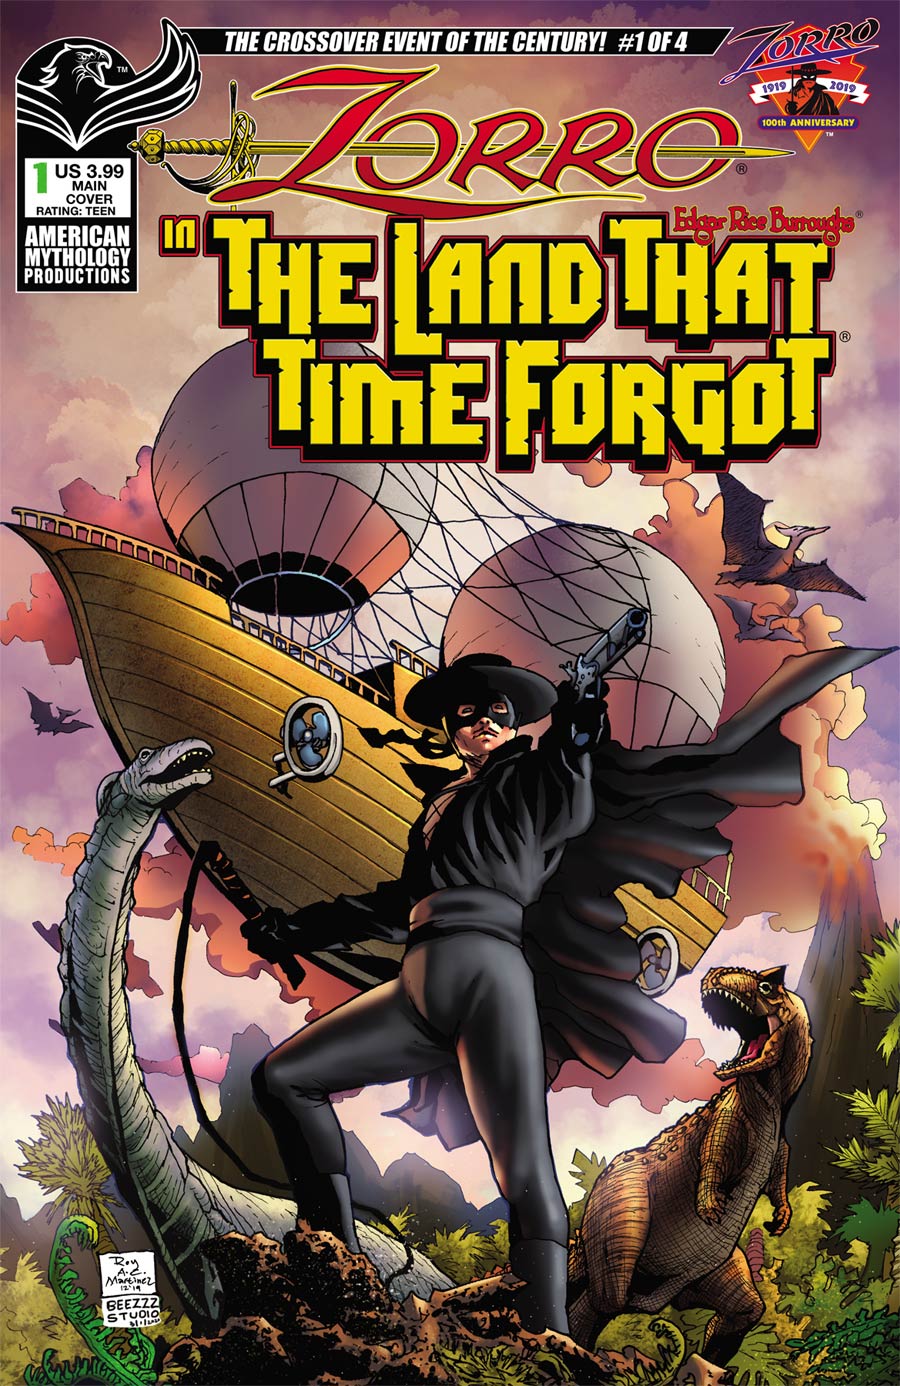 Zorro In The Land That Time Forgot #1 Cover A Regular Roy Allan Martinez Cover